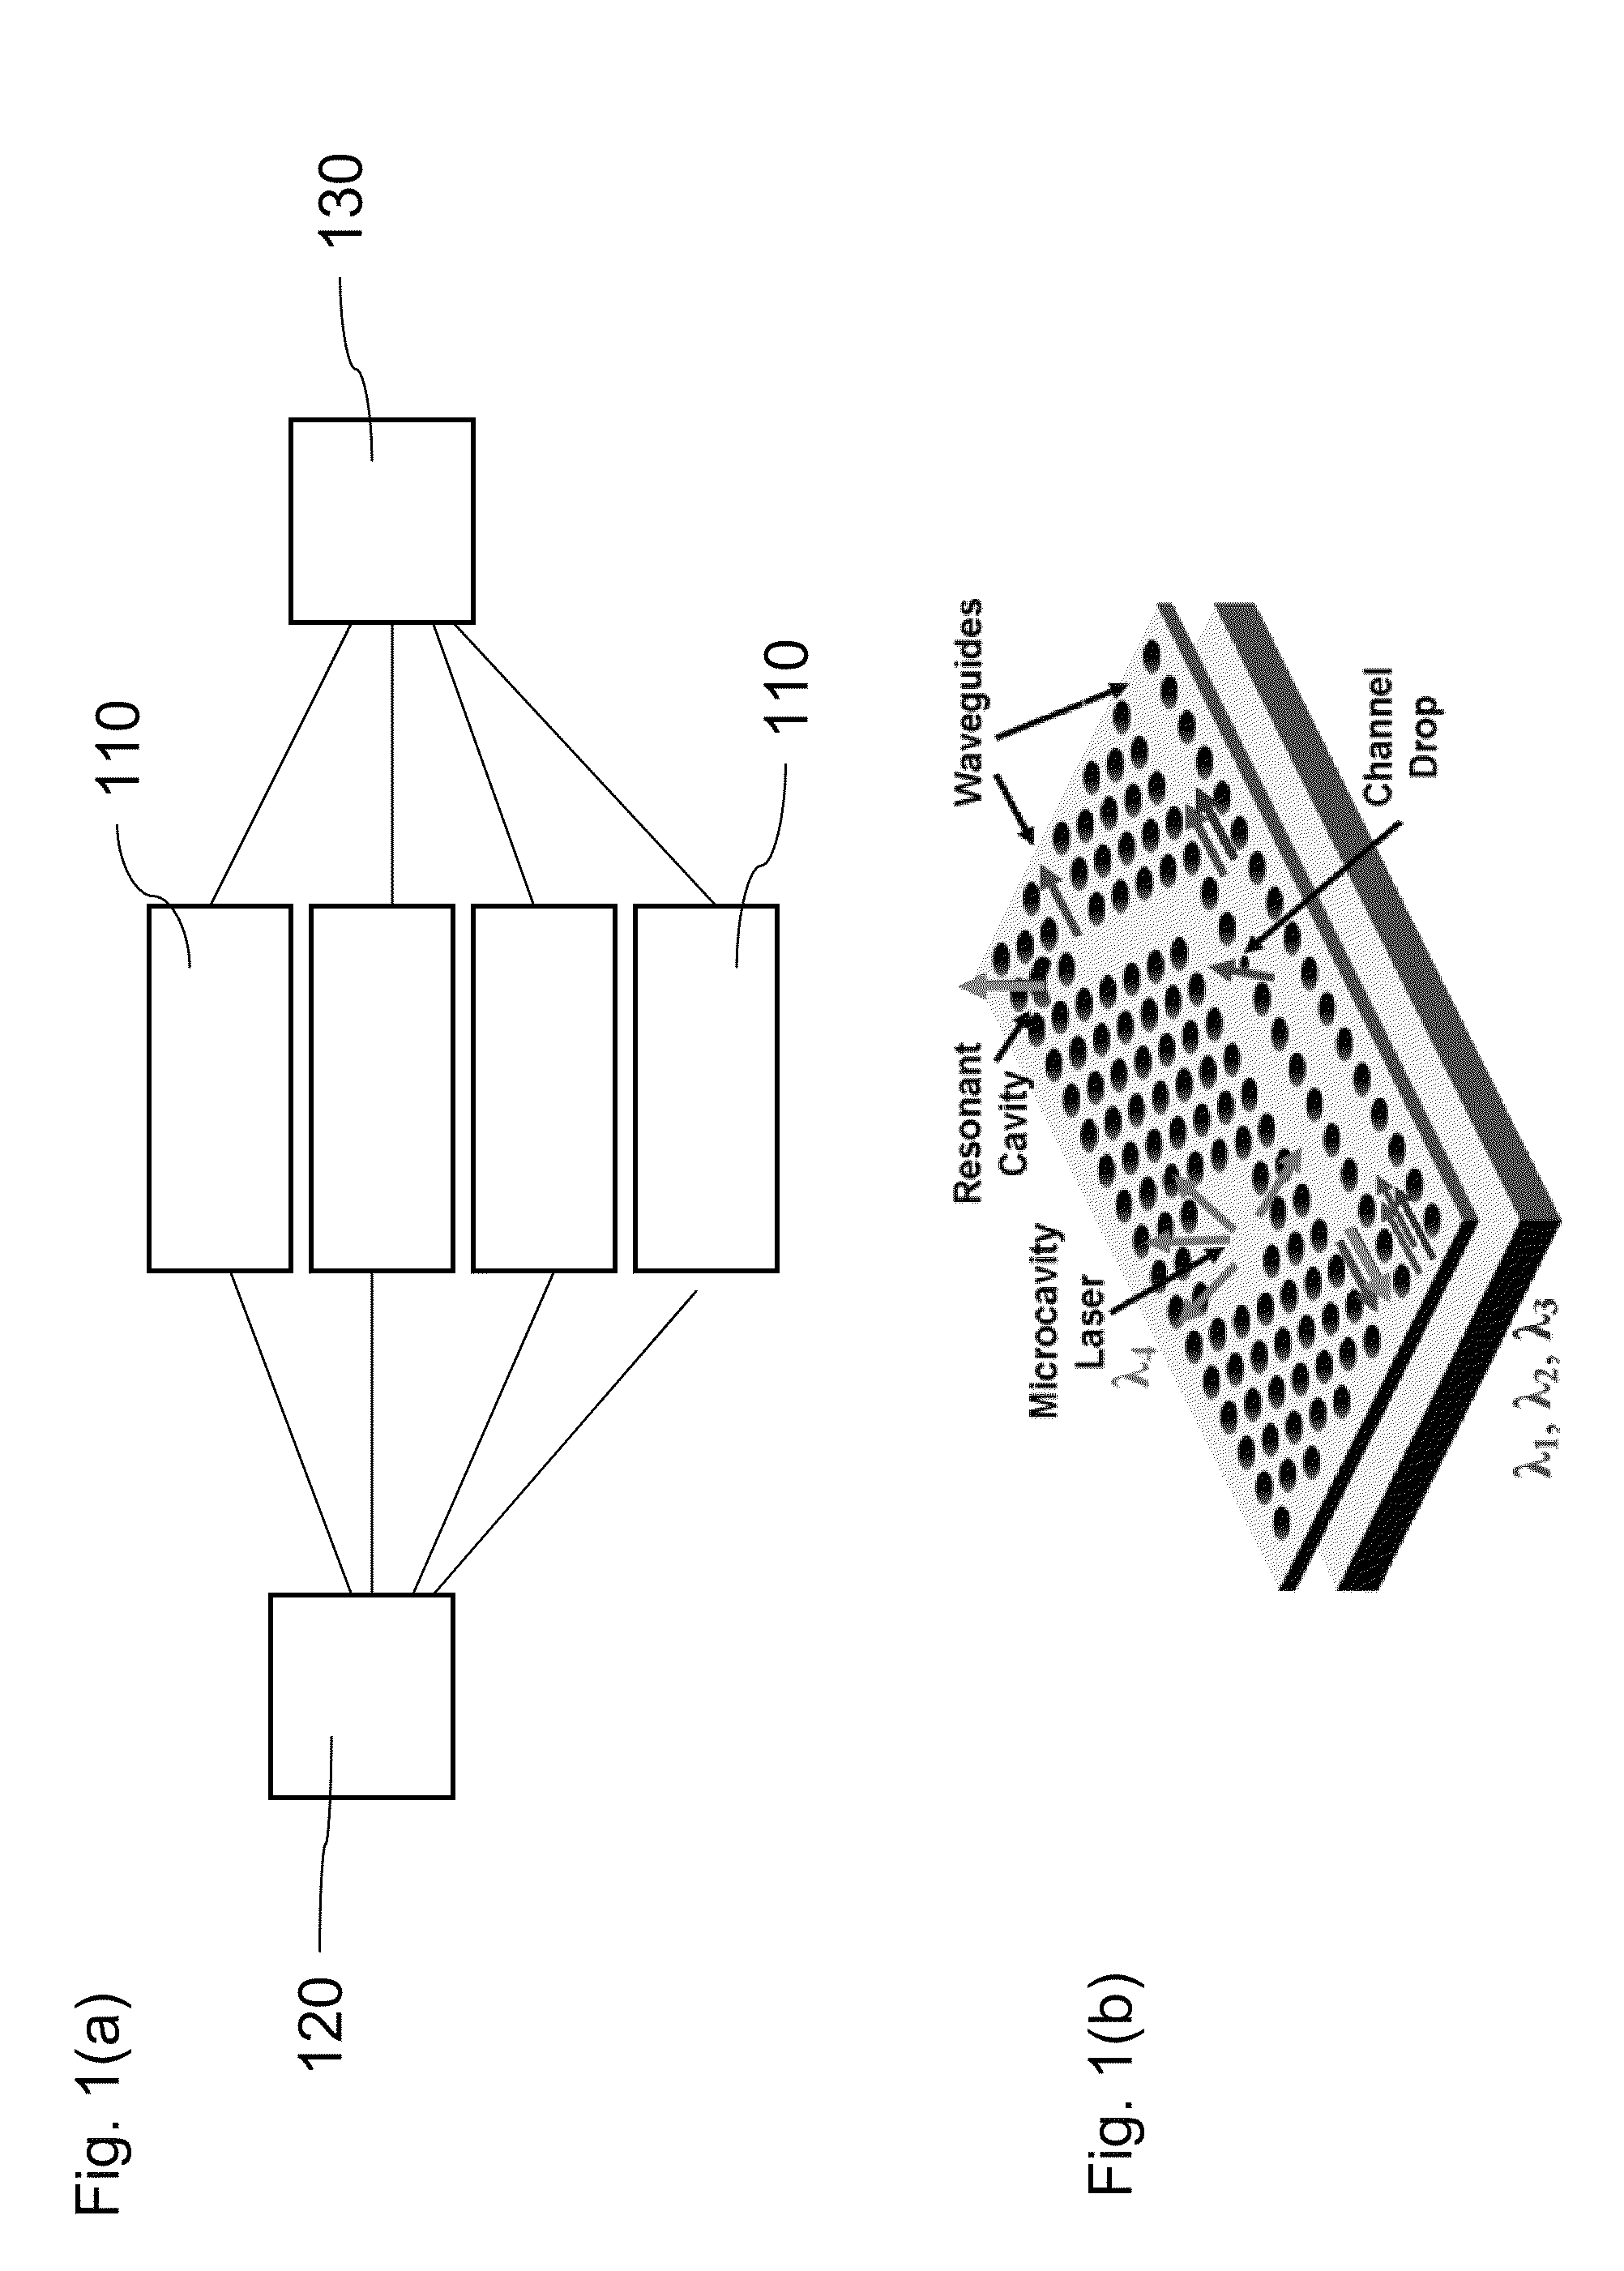 Methods, materials and devices for light manipulation with oriented molecular assemblies in micronscale photonic circuit elements with High-Q or slow light